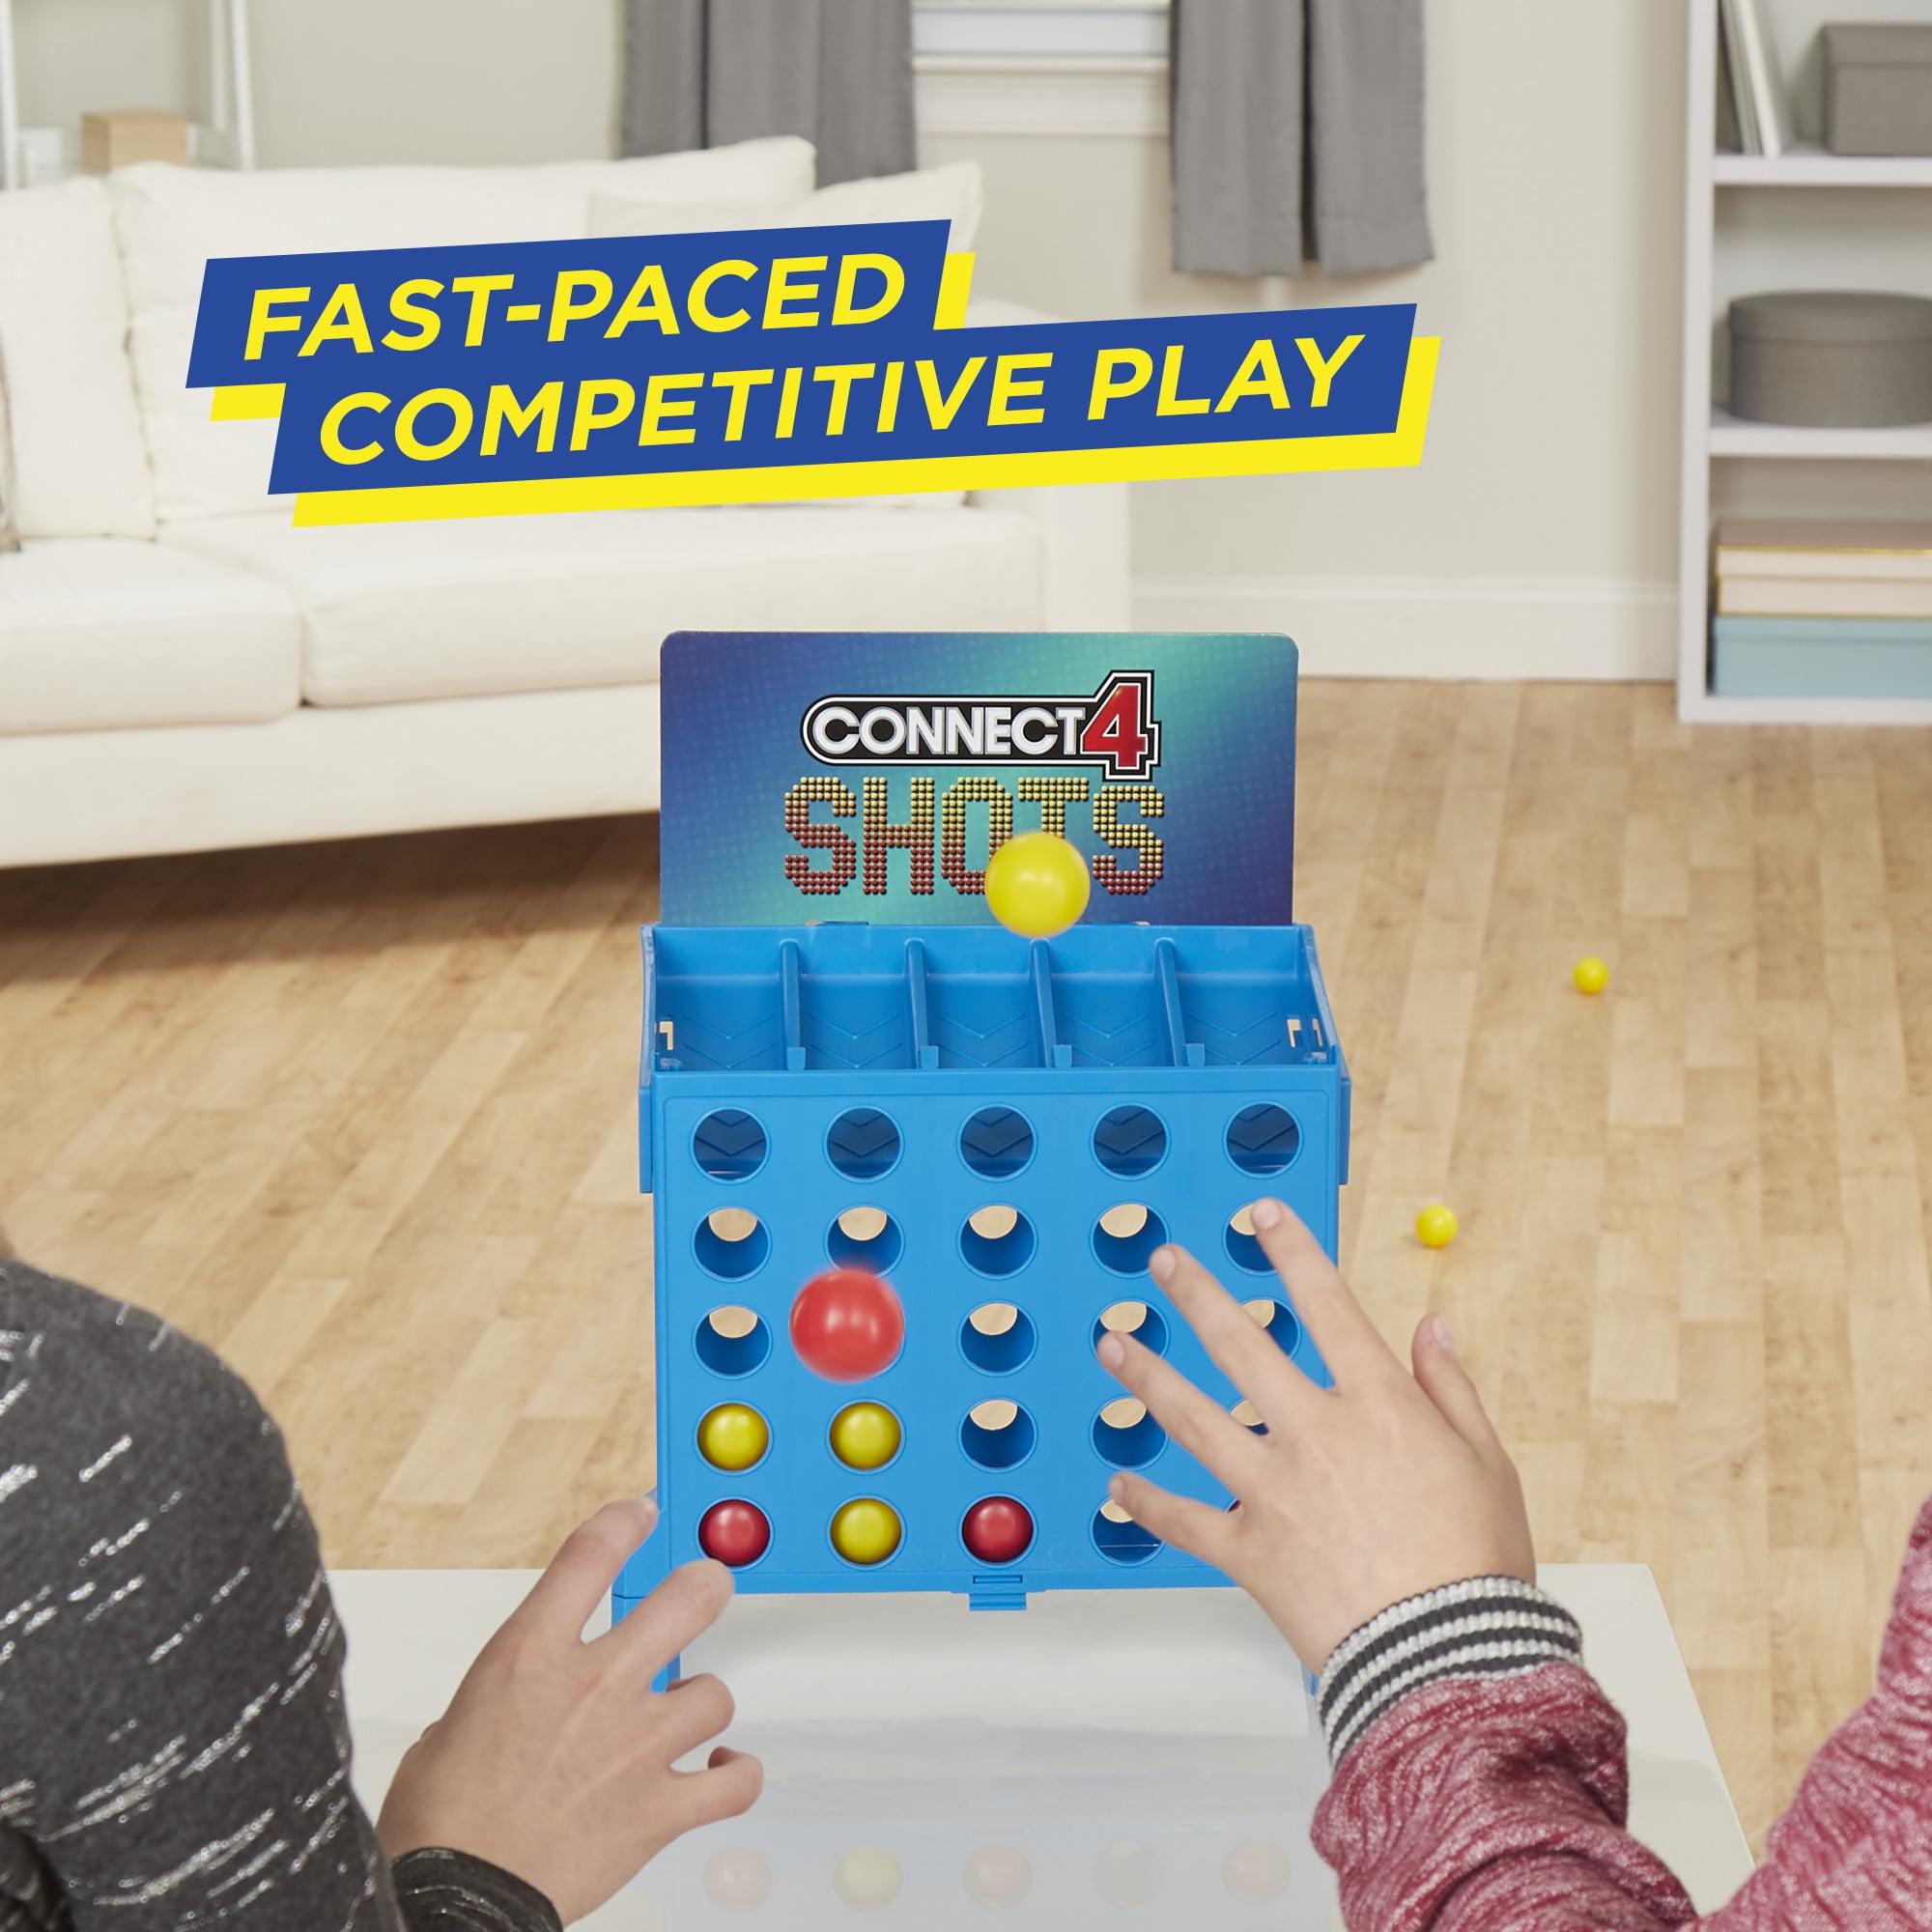 4 Shots Board Connect Game Bouncing Linking Shots Bounce and Link Ball Game Juguetes educativos para niños LIUZHI Connect 4 Shots Game Classic Board Go 4 Shots In ALine Games Bounce 